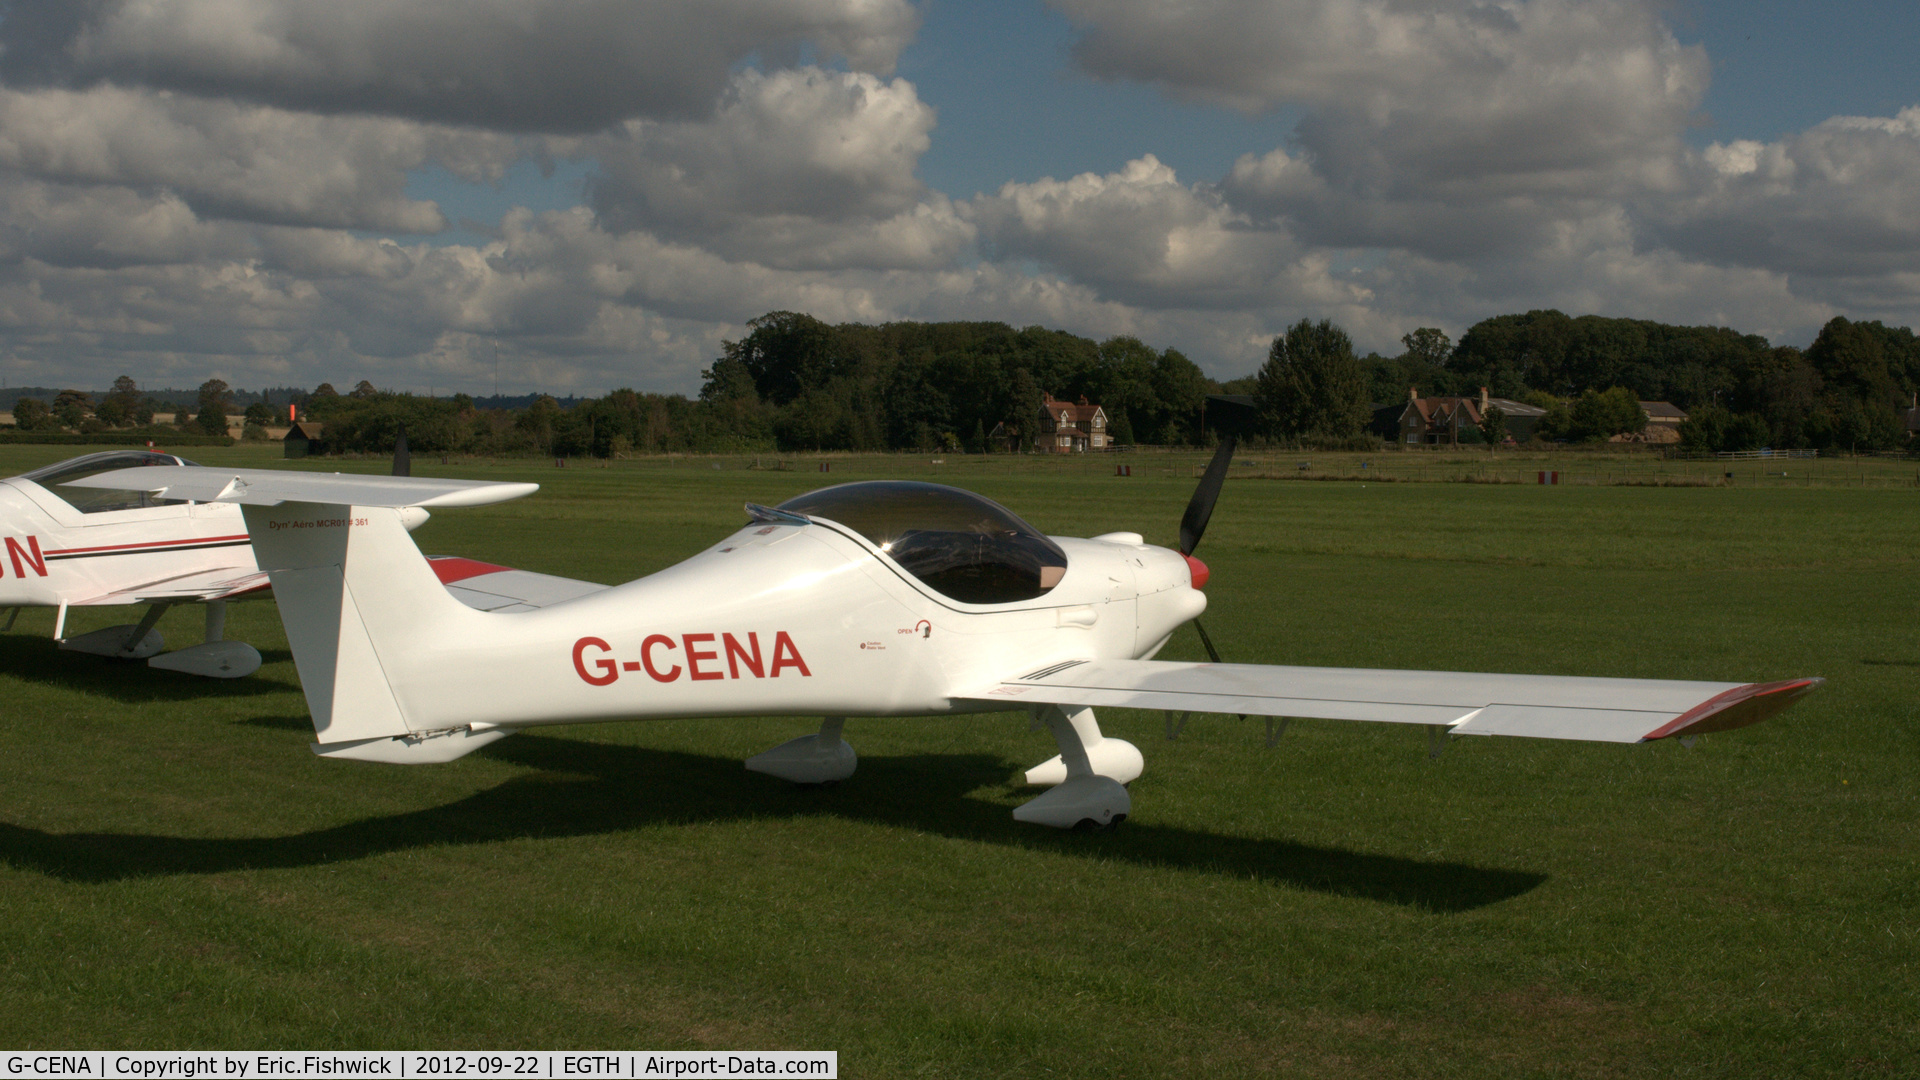 G-CENA, 2007 Dyn'Aero MCR-01 ULC Banbi C/N PFA 301B-14640, 2. G-CENA at Shuttleworth Uncovered - Air Show, Sept. 2012.